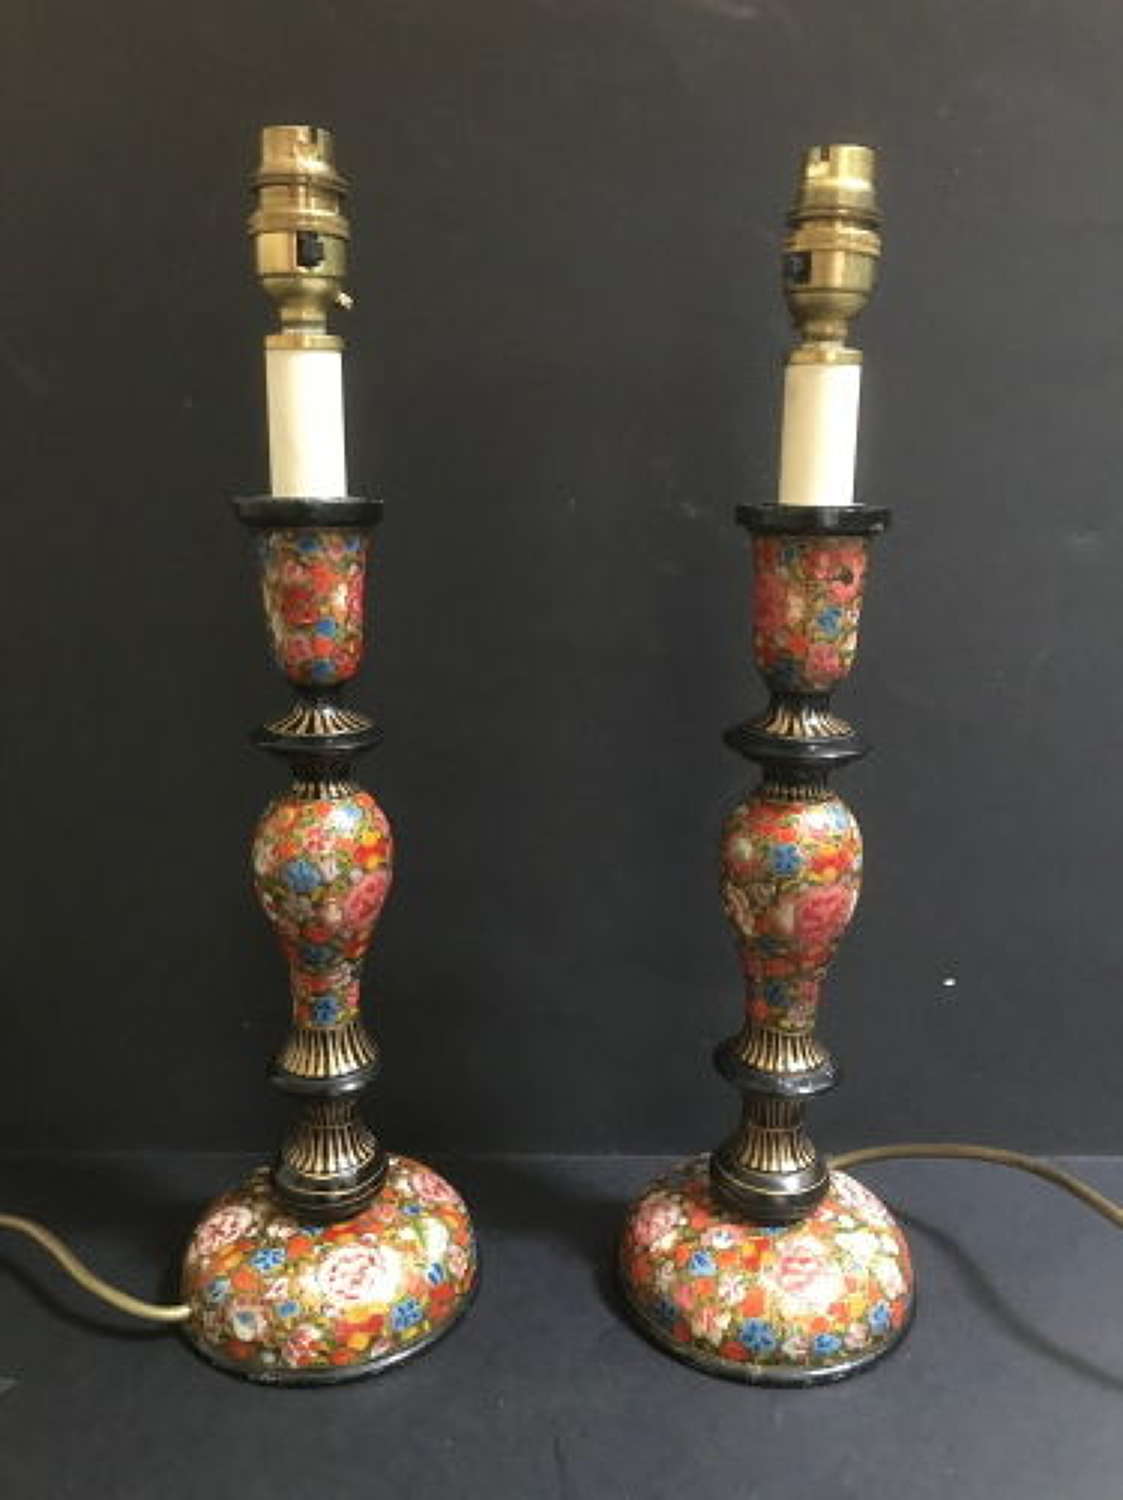 Pair of Highly Decorative Lamps